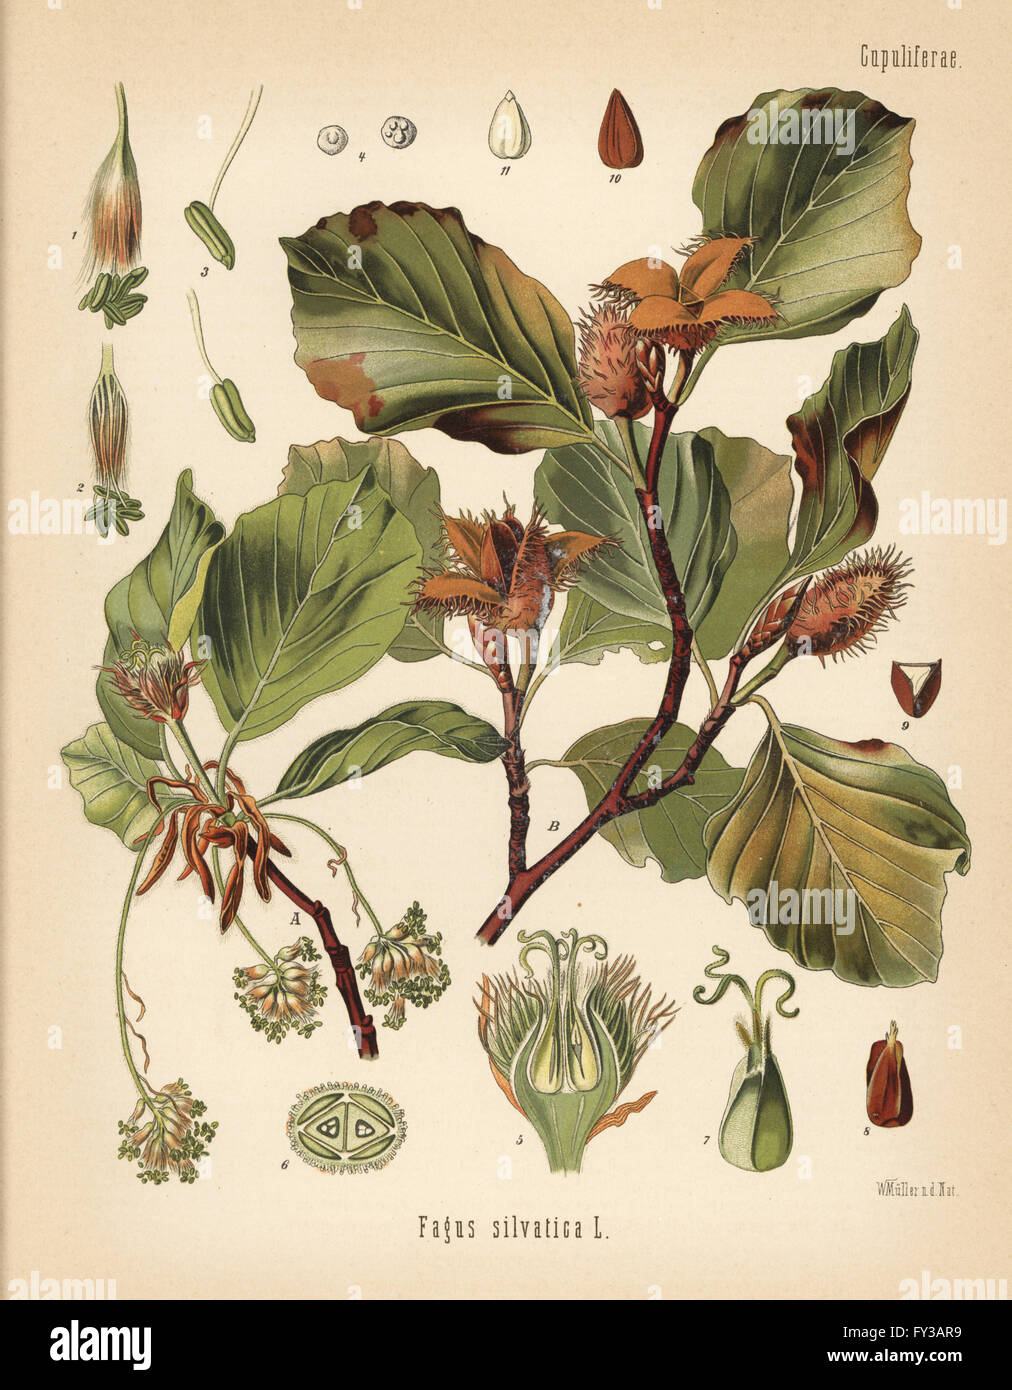 European beech tree, Fagus sylvatica (Fagus silvatica). Chromolithograph after a botanical illustration by Walther Muller from Hermann Adolph Koehler's Medicinal Plants, edited by Gustav Pabst, Koehler, Germany, 1887. Stock Photo